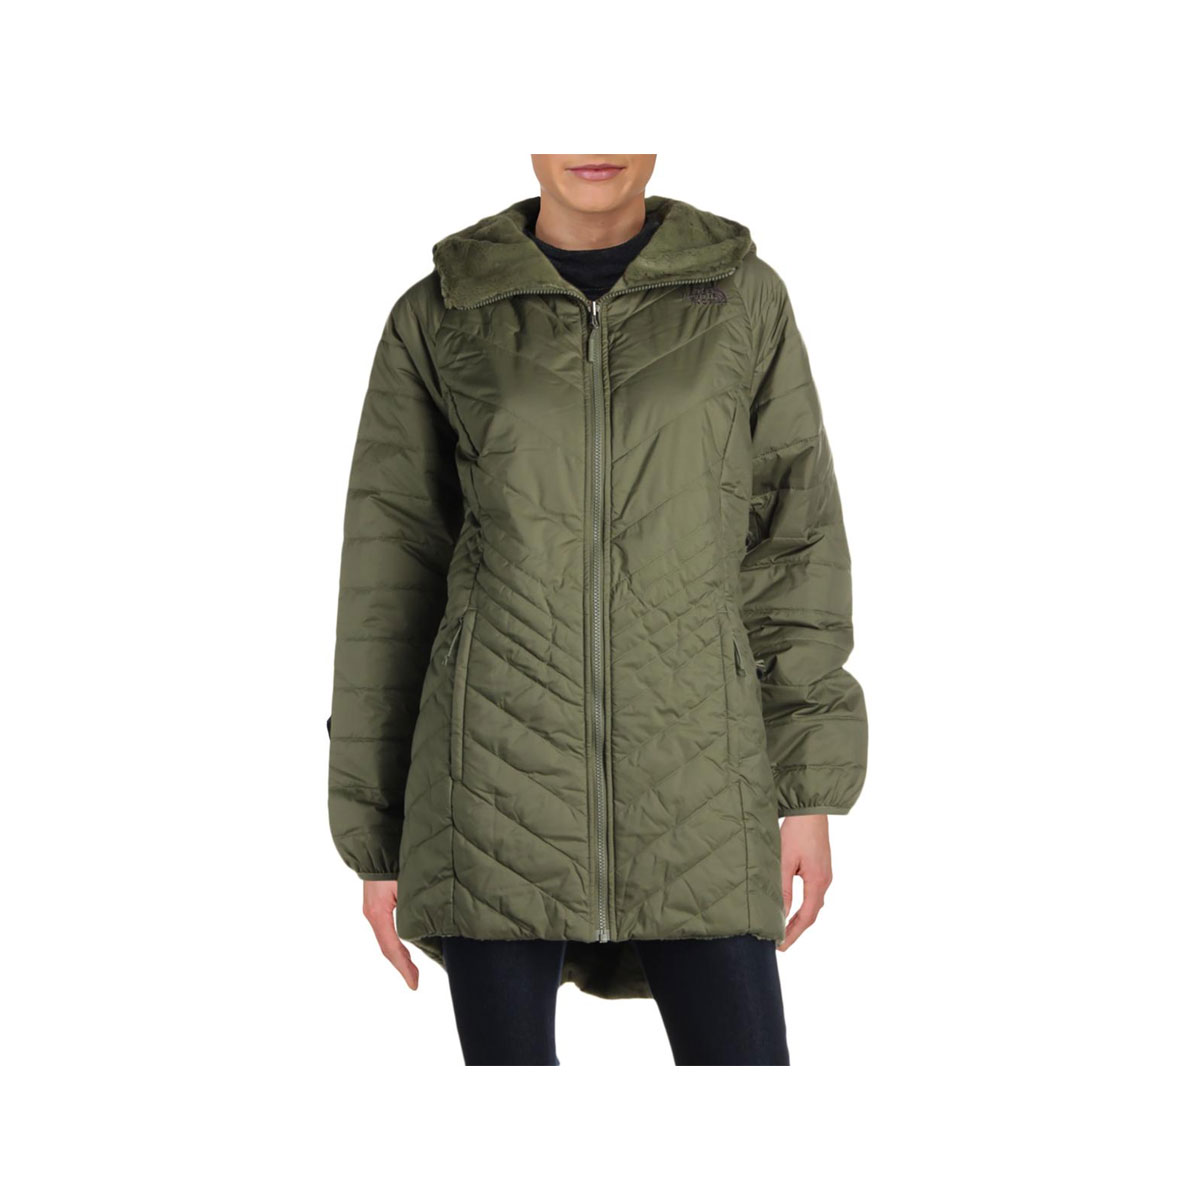 the north face mossbud insulated reversible jacket